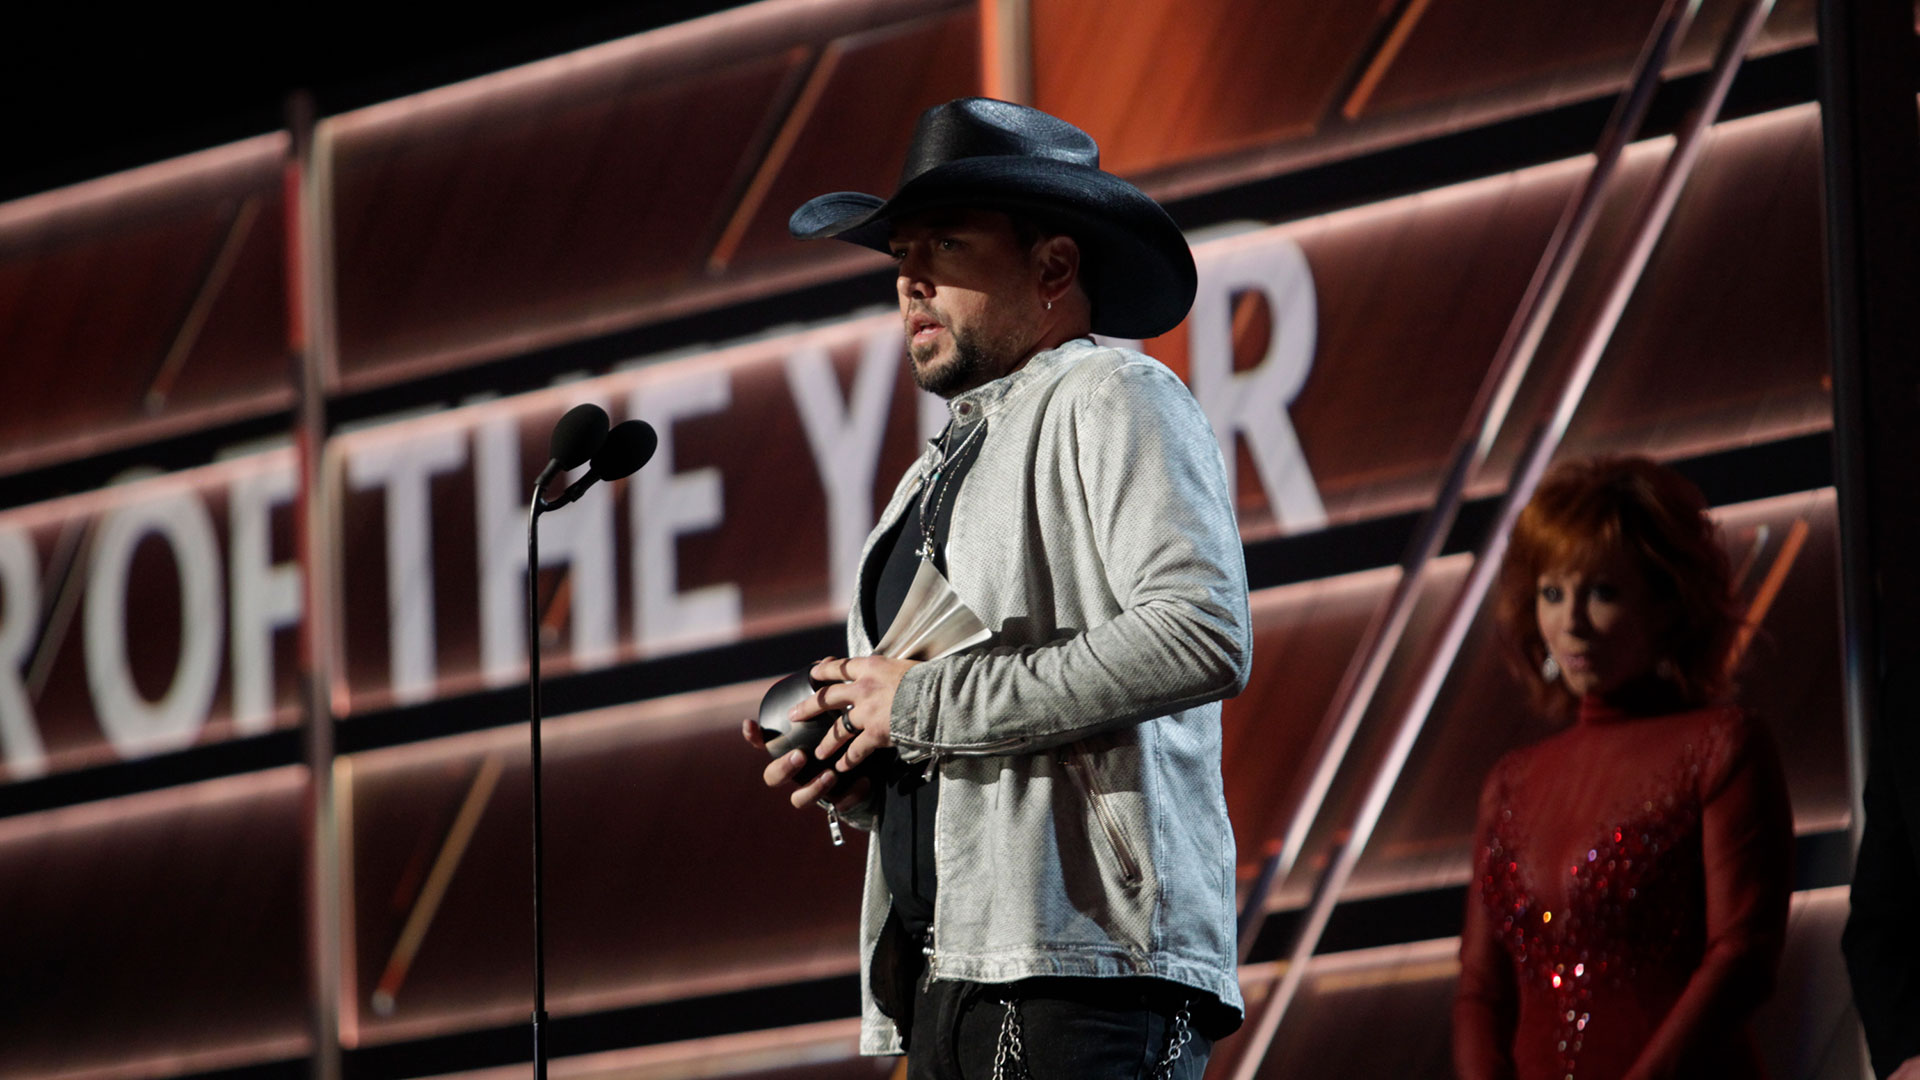 Jason Aldean wins Entertainer of the Year at the 53rd ACM Awards.